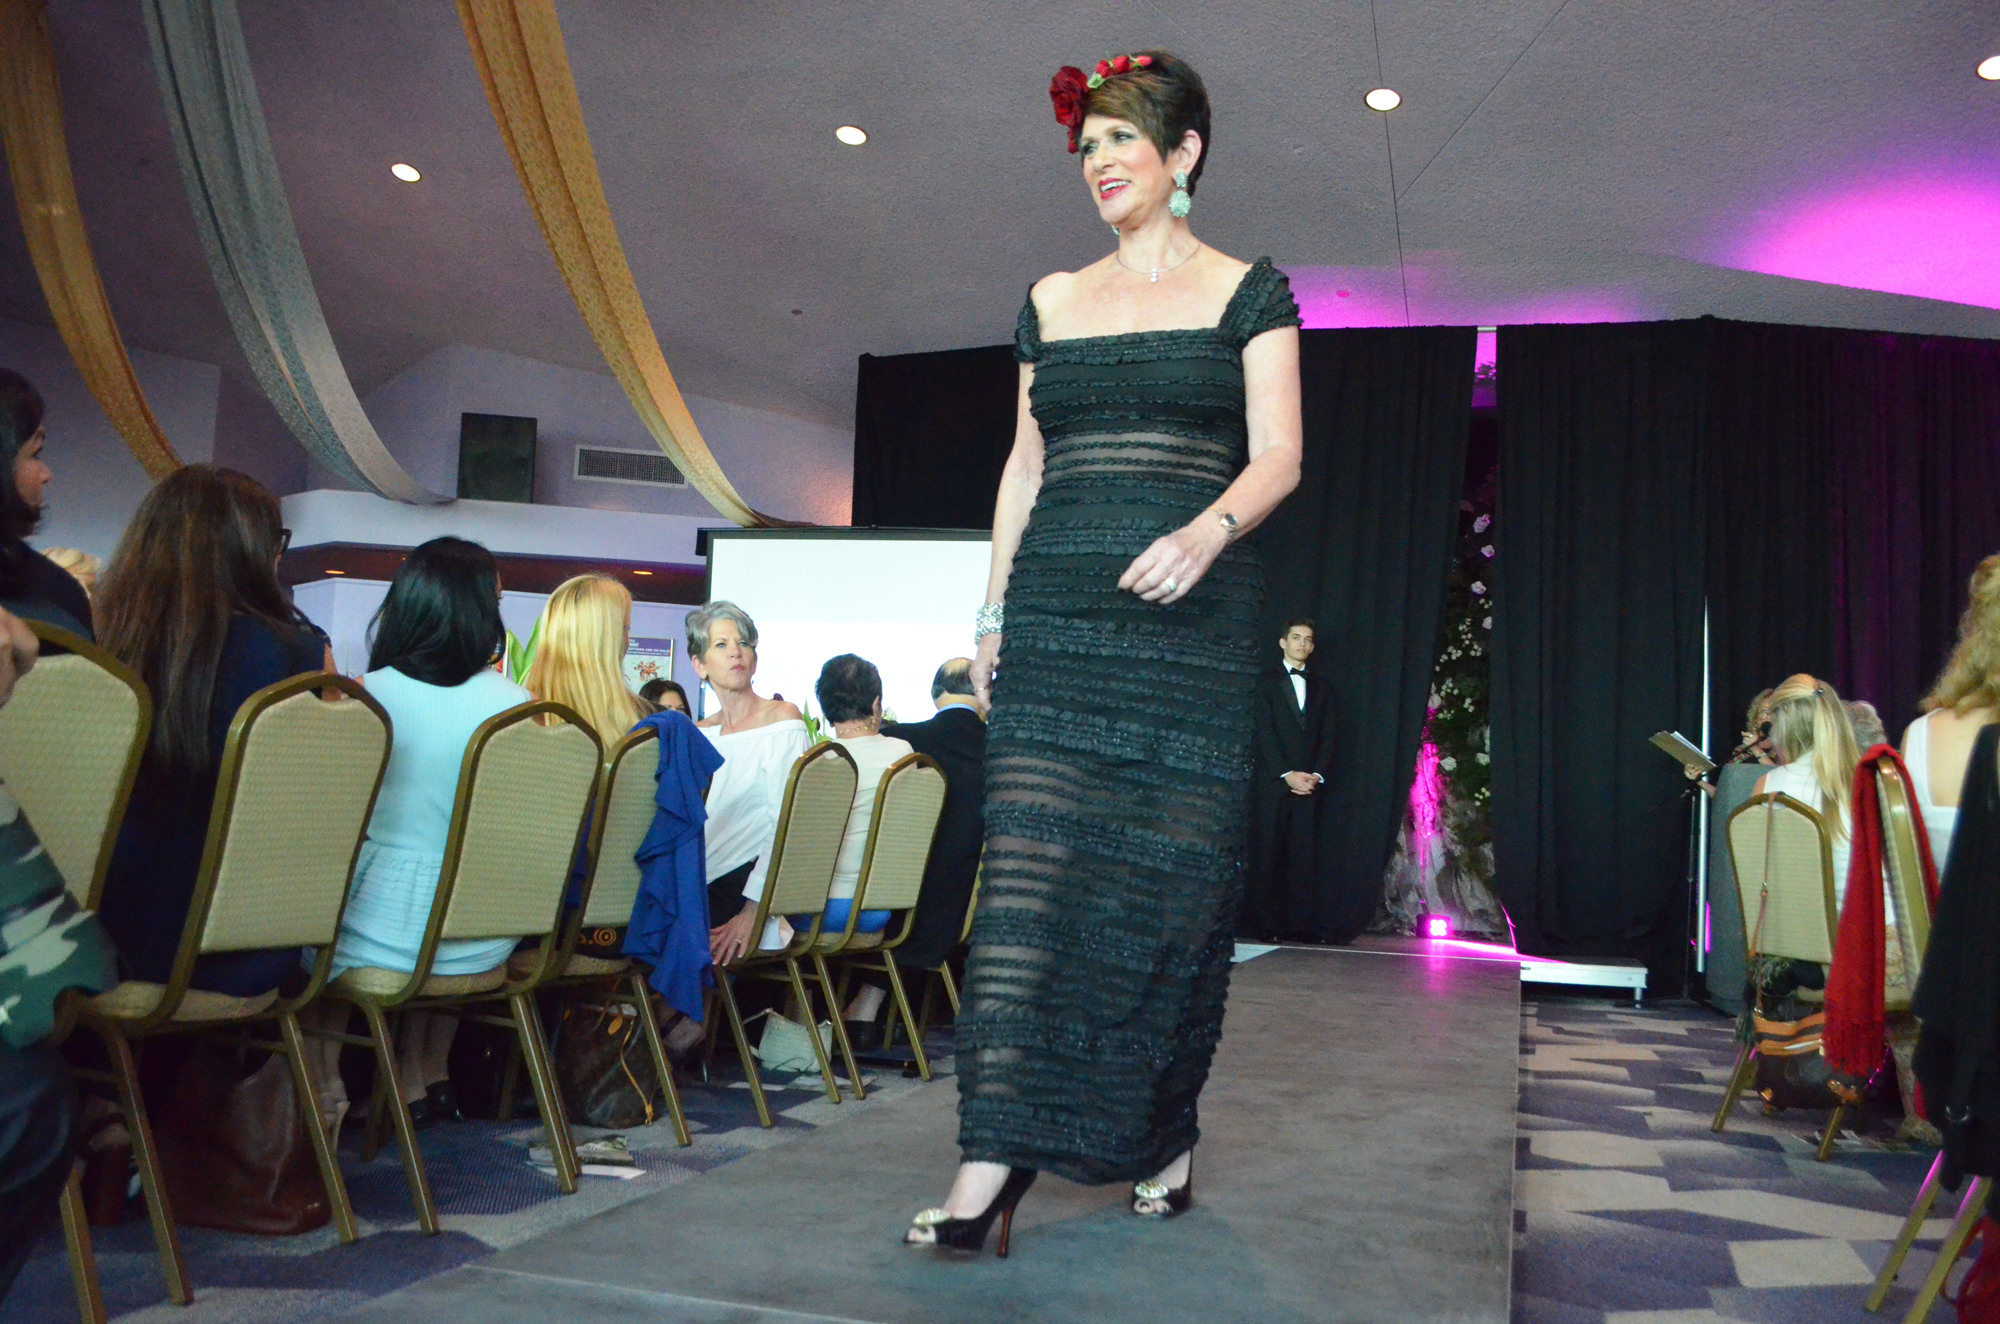 Wendy Feinstein struts the runway in one of her own dresses that she donated to Selah Vie Boutique. Photo by Niki Kottmann